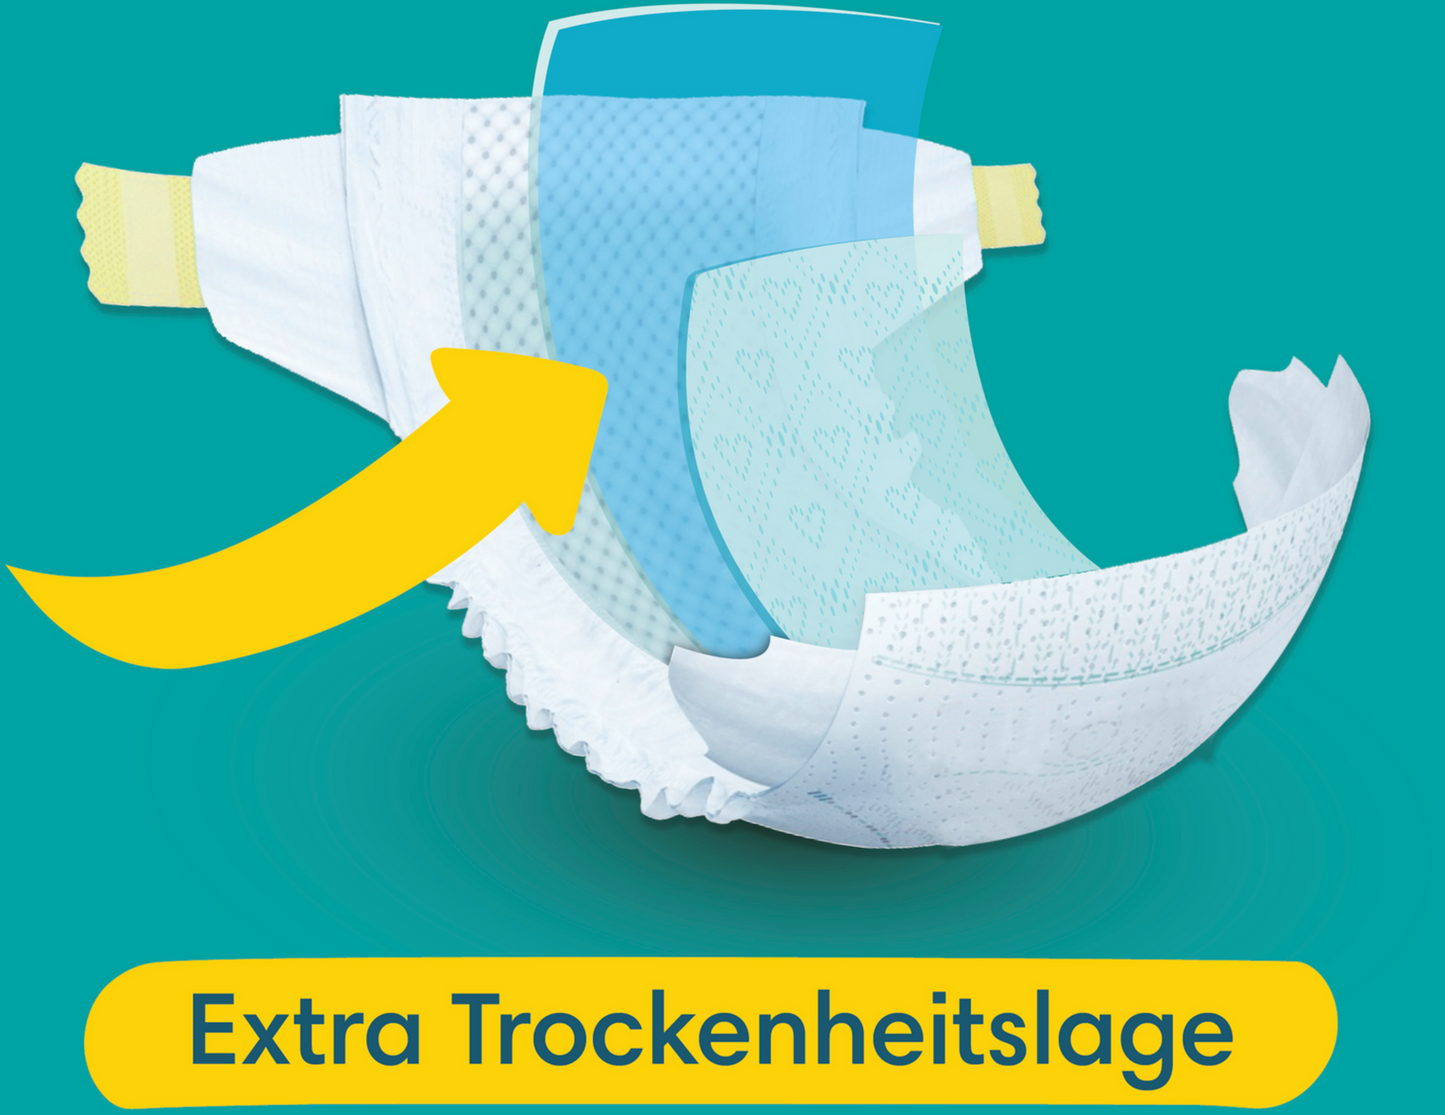 Pampers Baby-Dry T3 Midi 6-10kg Maxi Pack (124 pces)